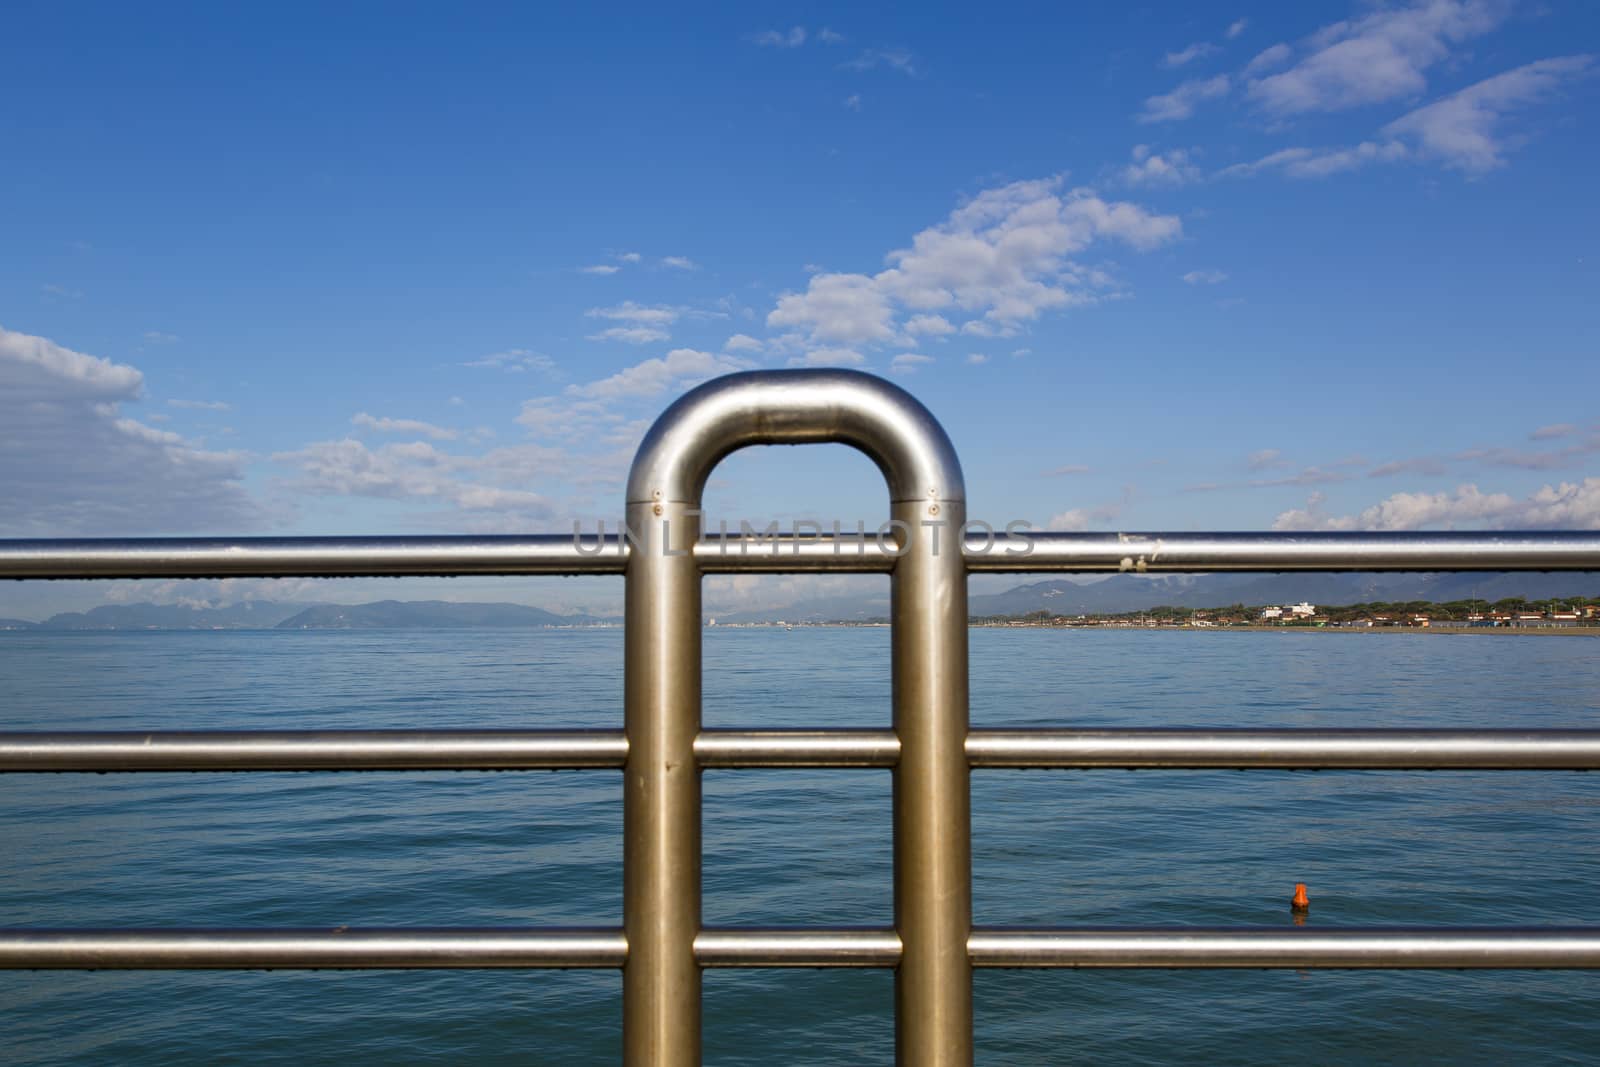 Close up view of the railing of a pier with marine landscape in the background